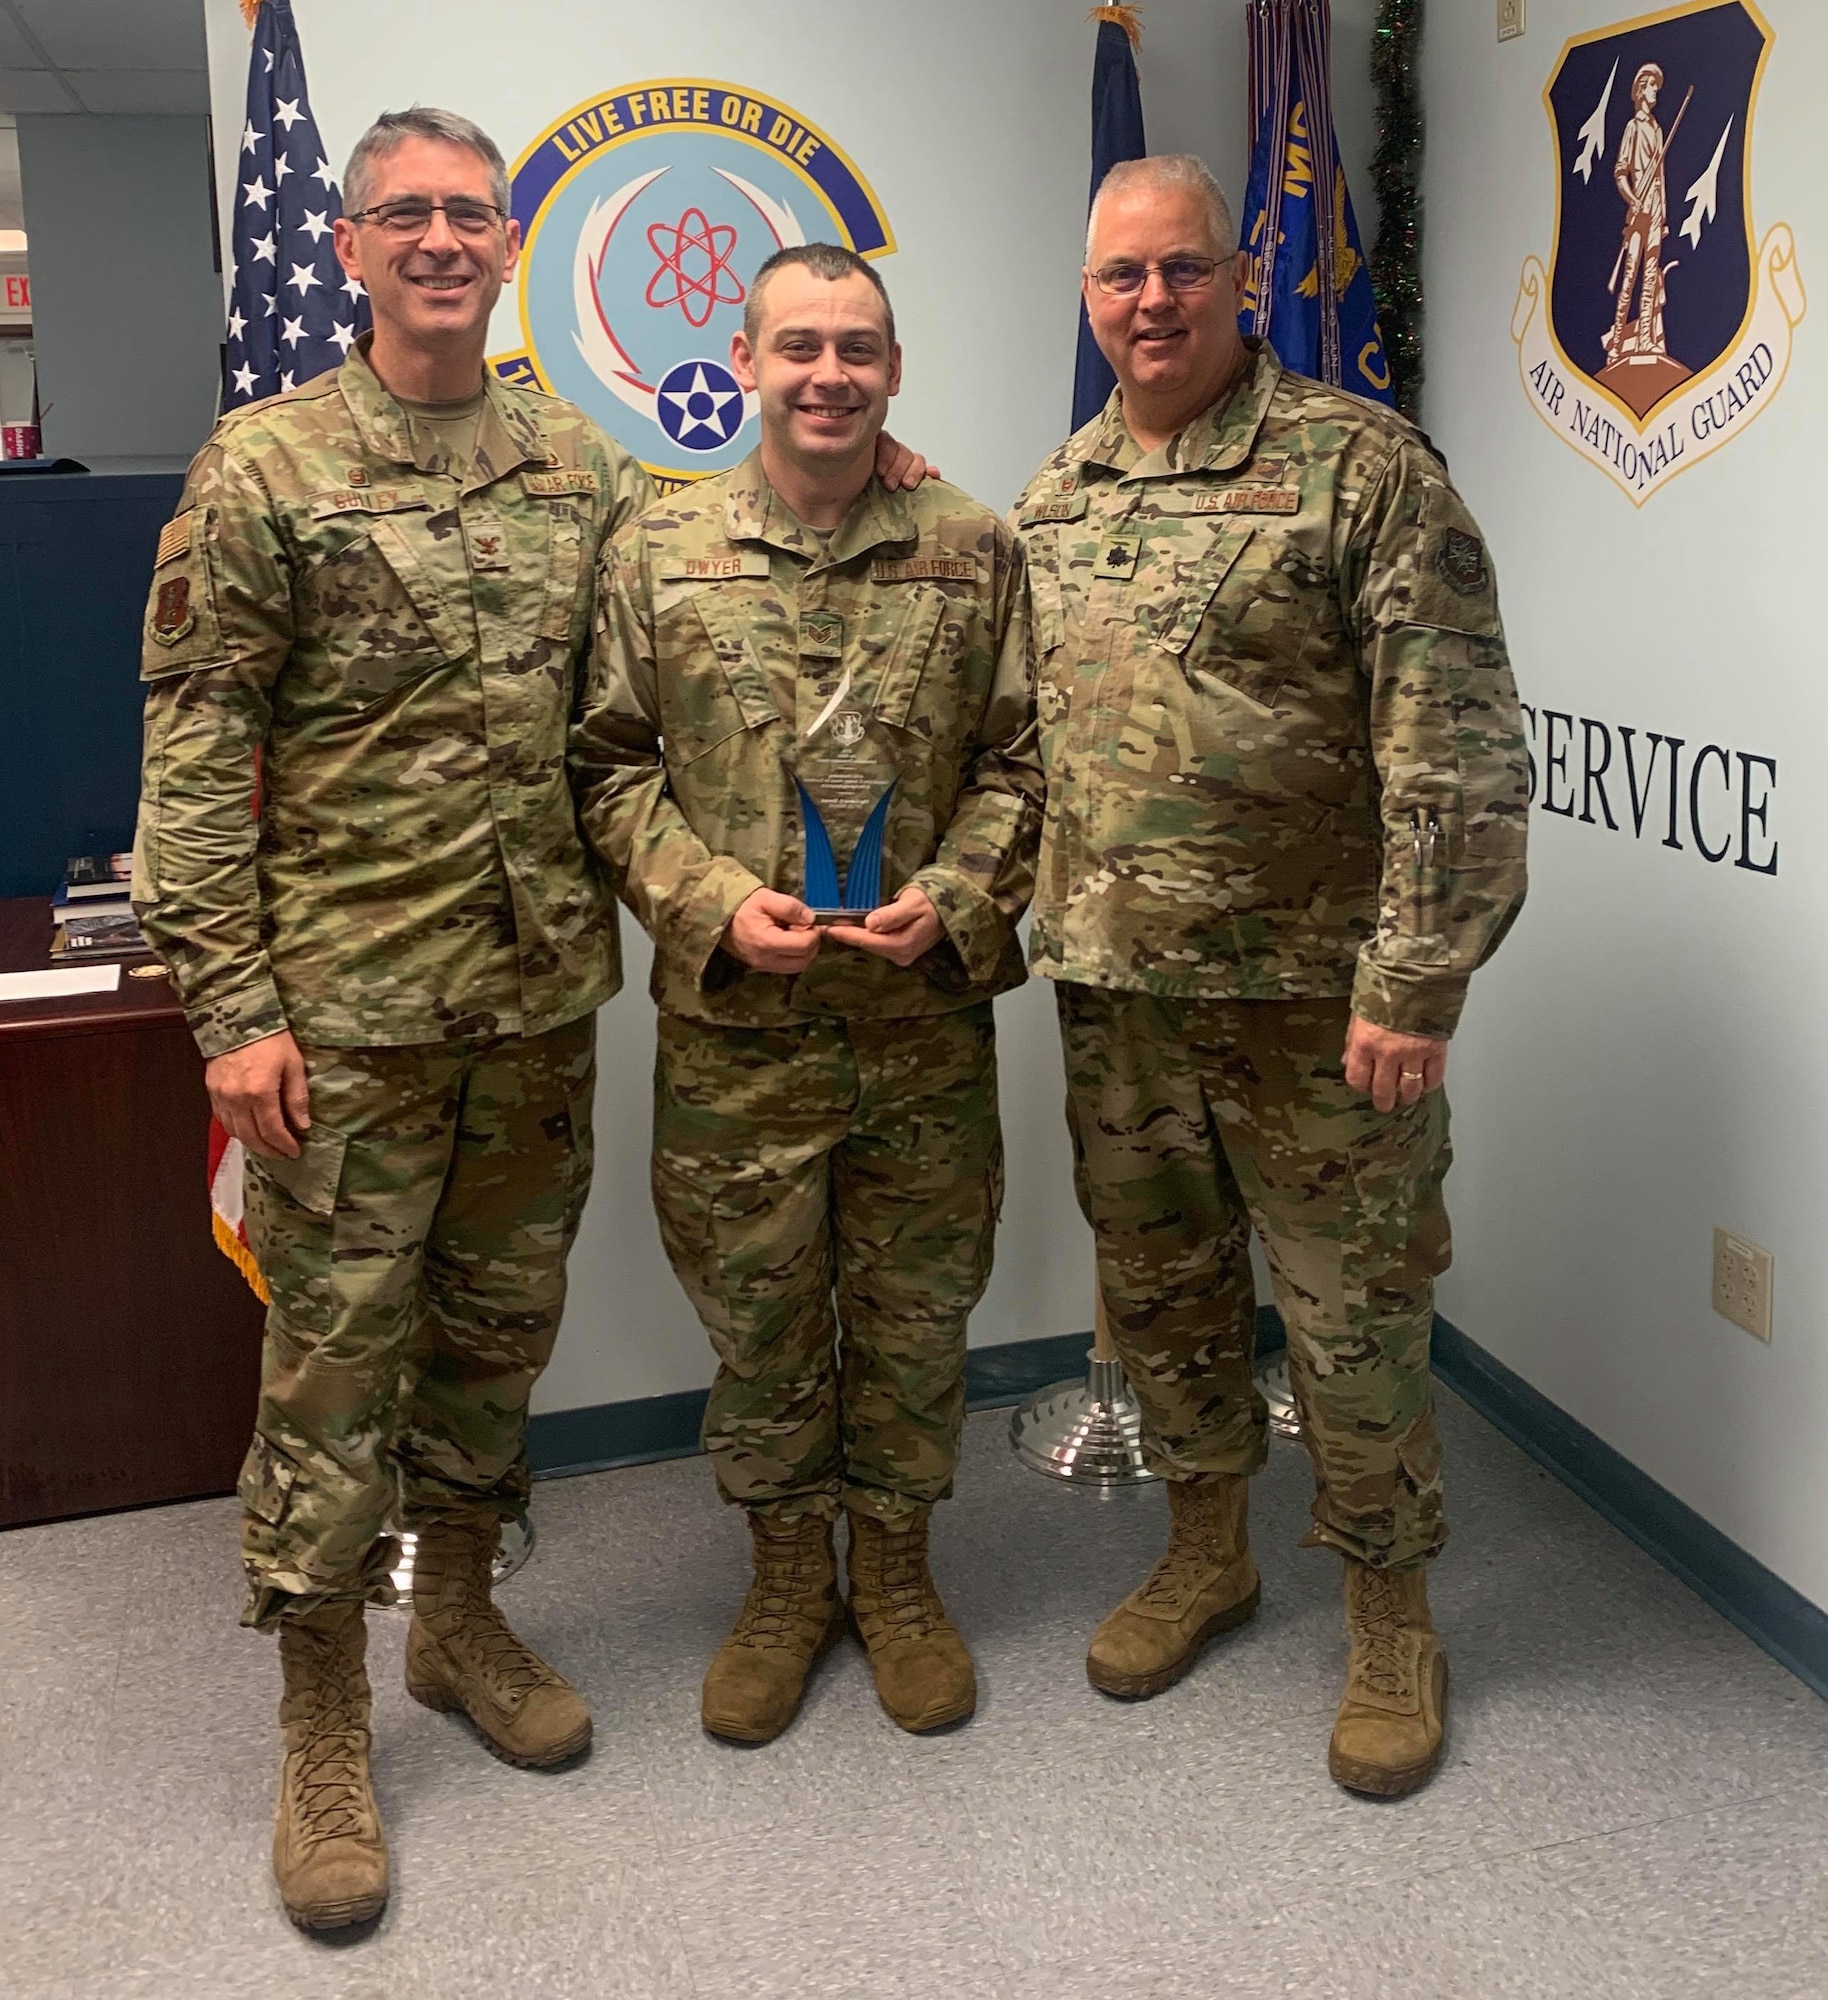 Col. Stryder Sulley, Staff Sgt. Alan Dwyer and Lt. Col William Wilson, Pease Air National Guard Base, N.H. on Dec. 7, 2019. Sulley presented Dwyer with the 2019 Gen. John P. Jumper Award for Excellence in Warfighting Integration and Information Dominance during the 157th Communications' unit training assemply roll call. The award recognizes the best and brightest Airmen, teams, and units for their sustained superior performance in providing information dominance and cyberspace superiority to Air Force and (or) DoD missions and operations.(Photo courtesy 157th Communications Flight)